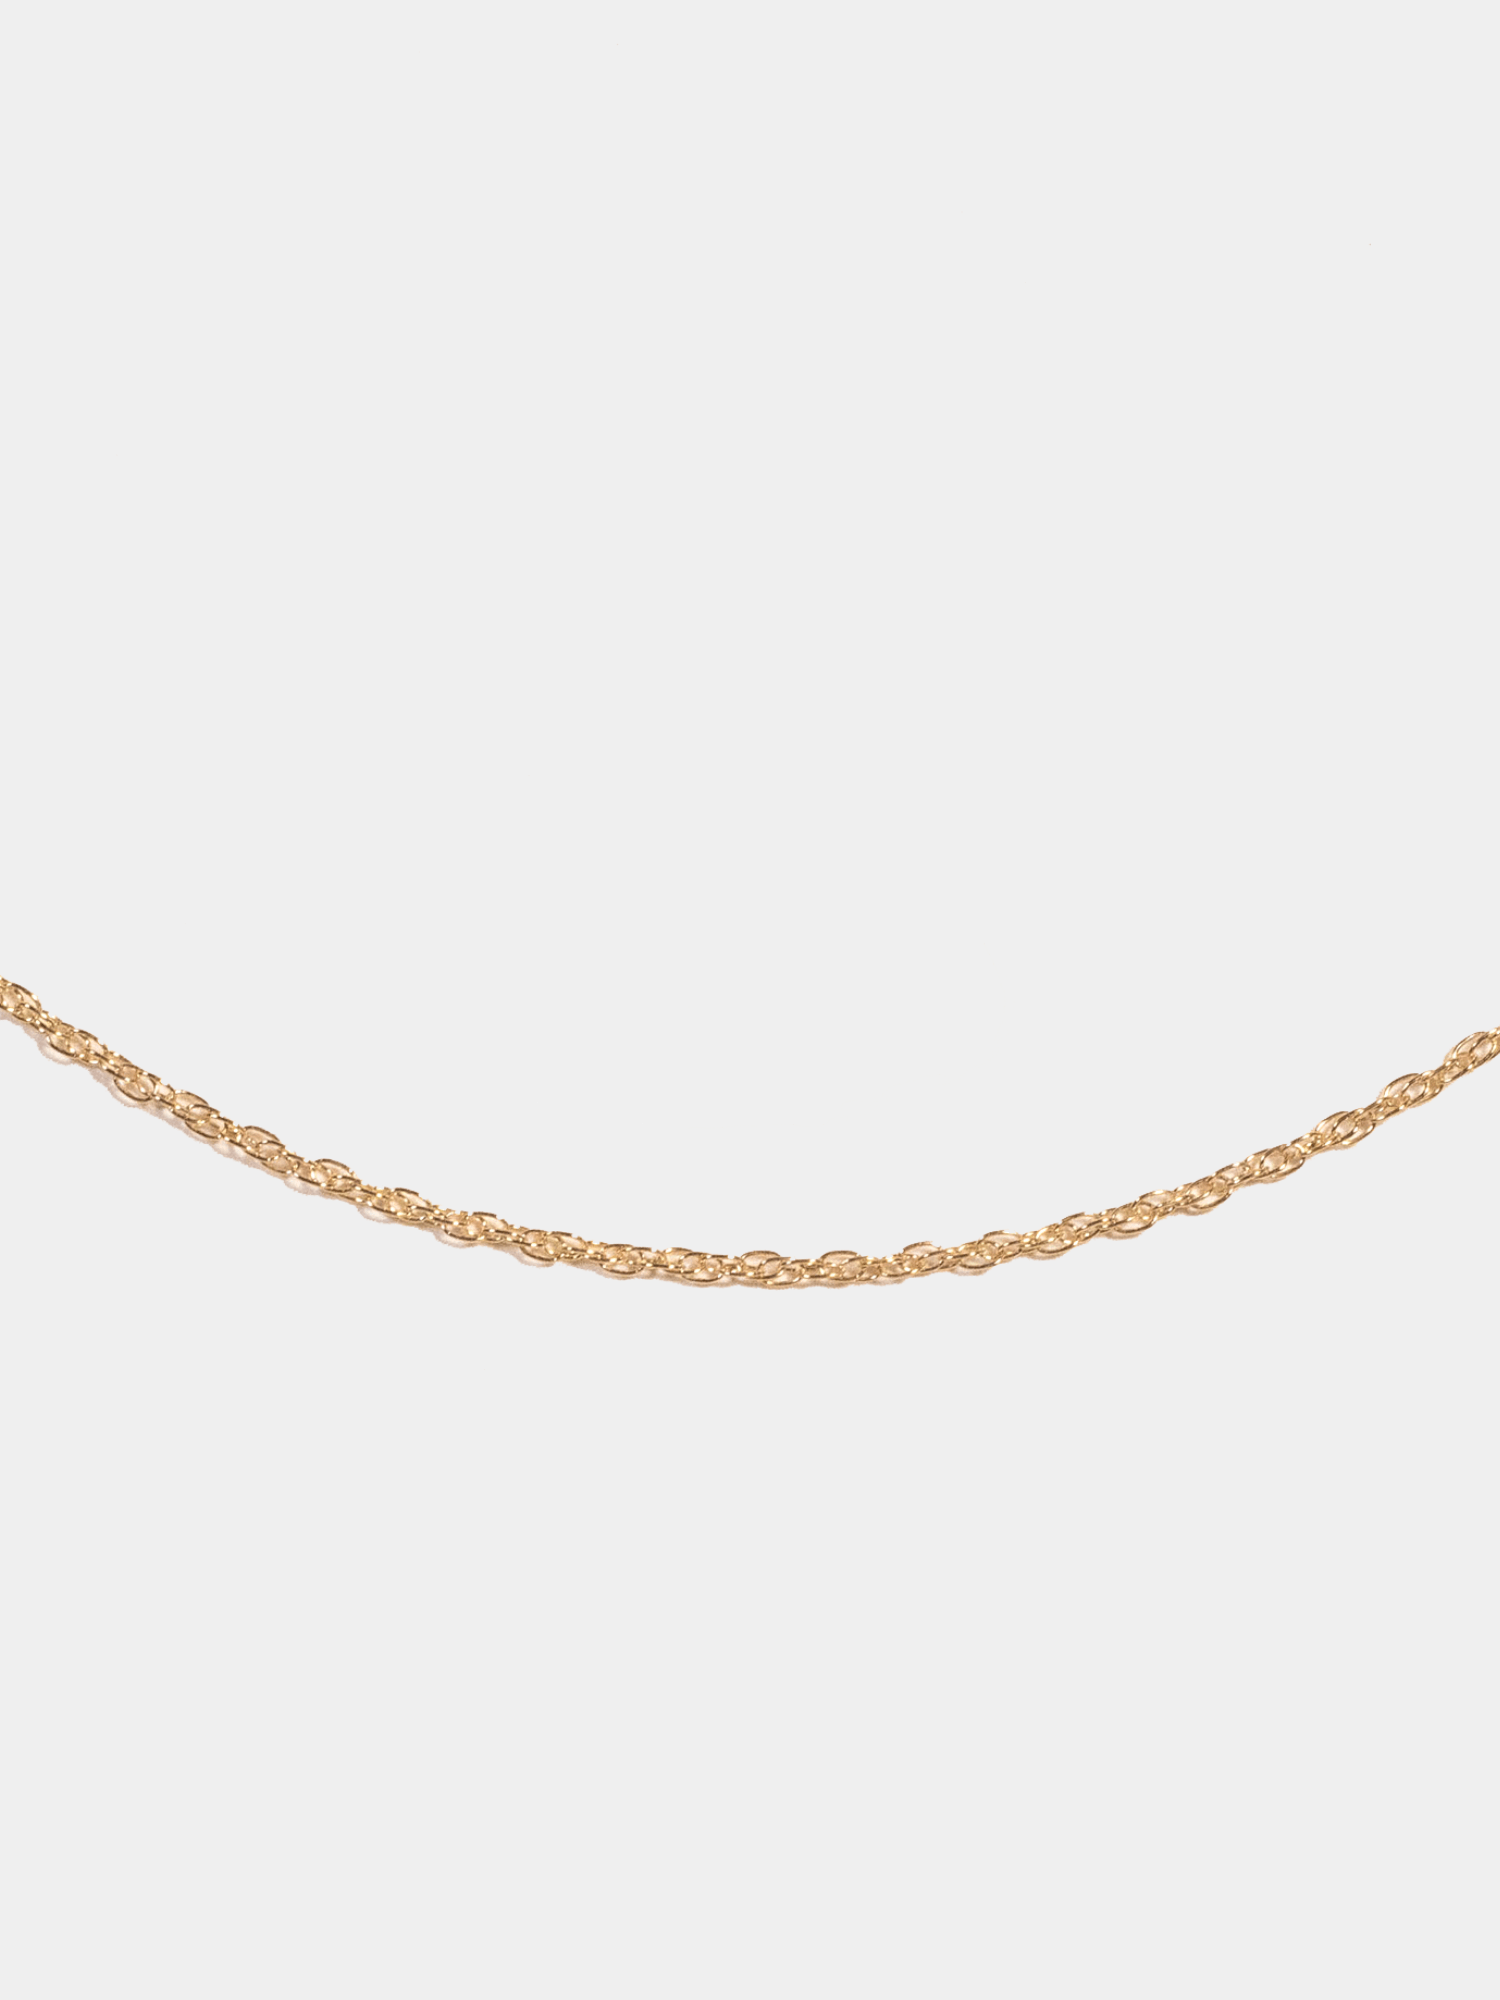 Shop OXB Necklace Gold Filled / 6" Rope Chain